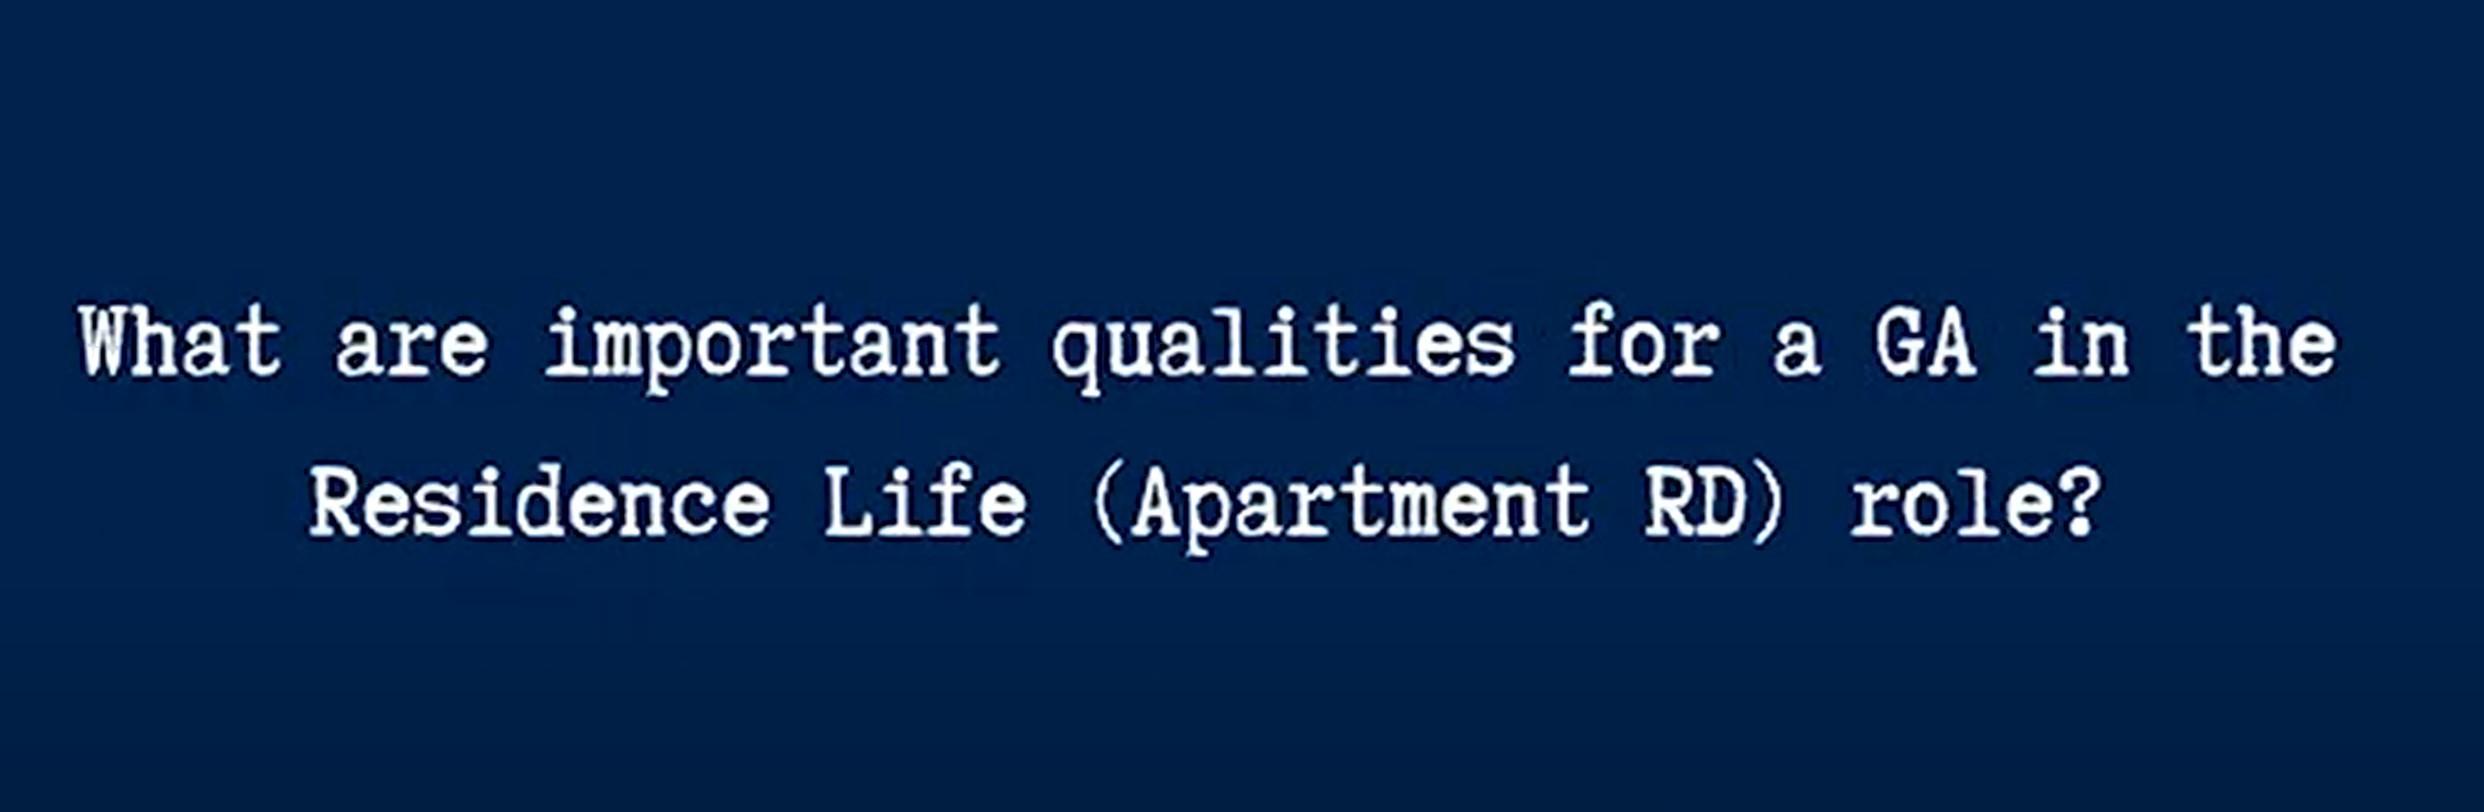 What are important qualities for a GA in the Residence Life (Apartment RD) role?